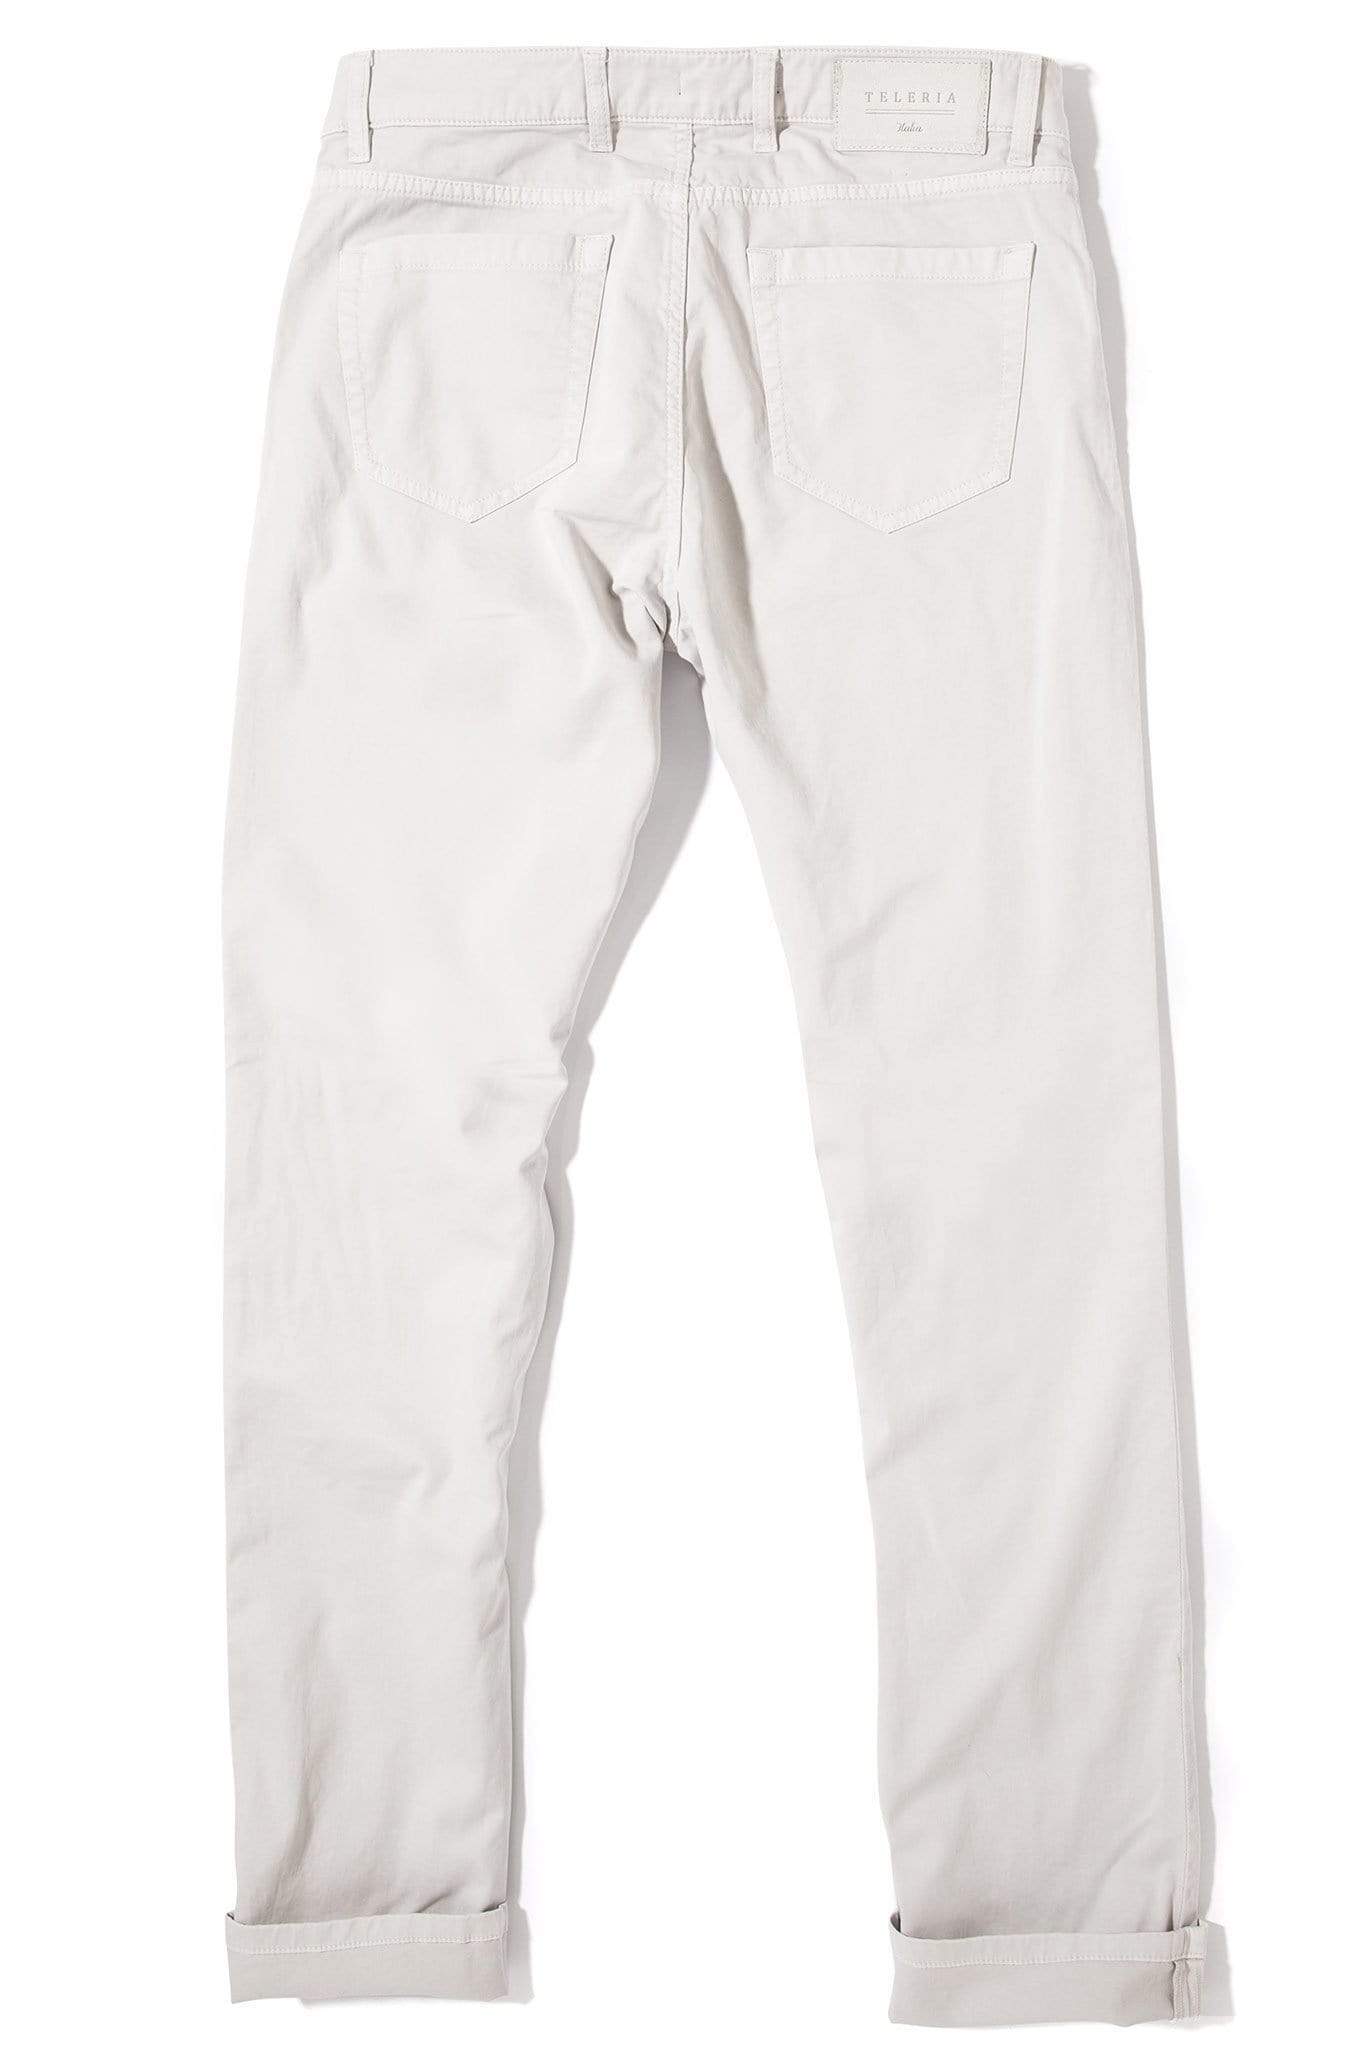 Yuma Soft Touch In Sasso | Mens - Pants - 5 Pocket | Teleria Zed